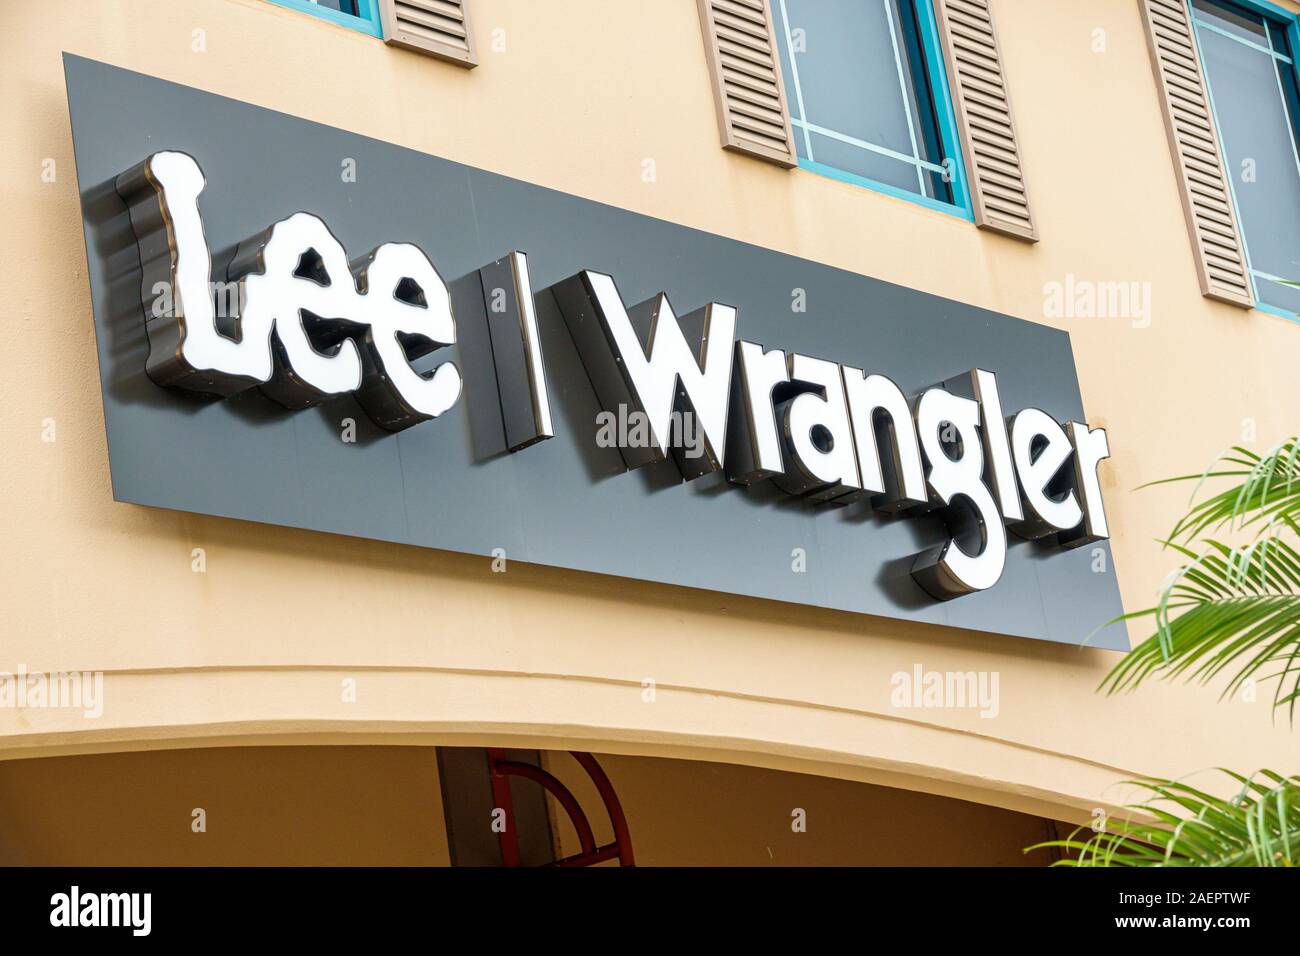 Lee Wrangler High Resolution Stock Photography and Images - Alamy